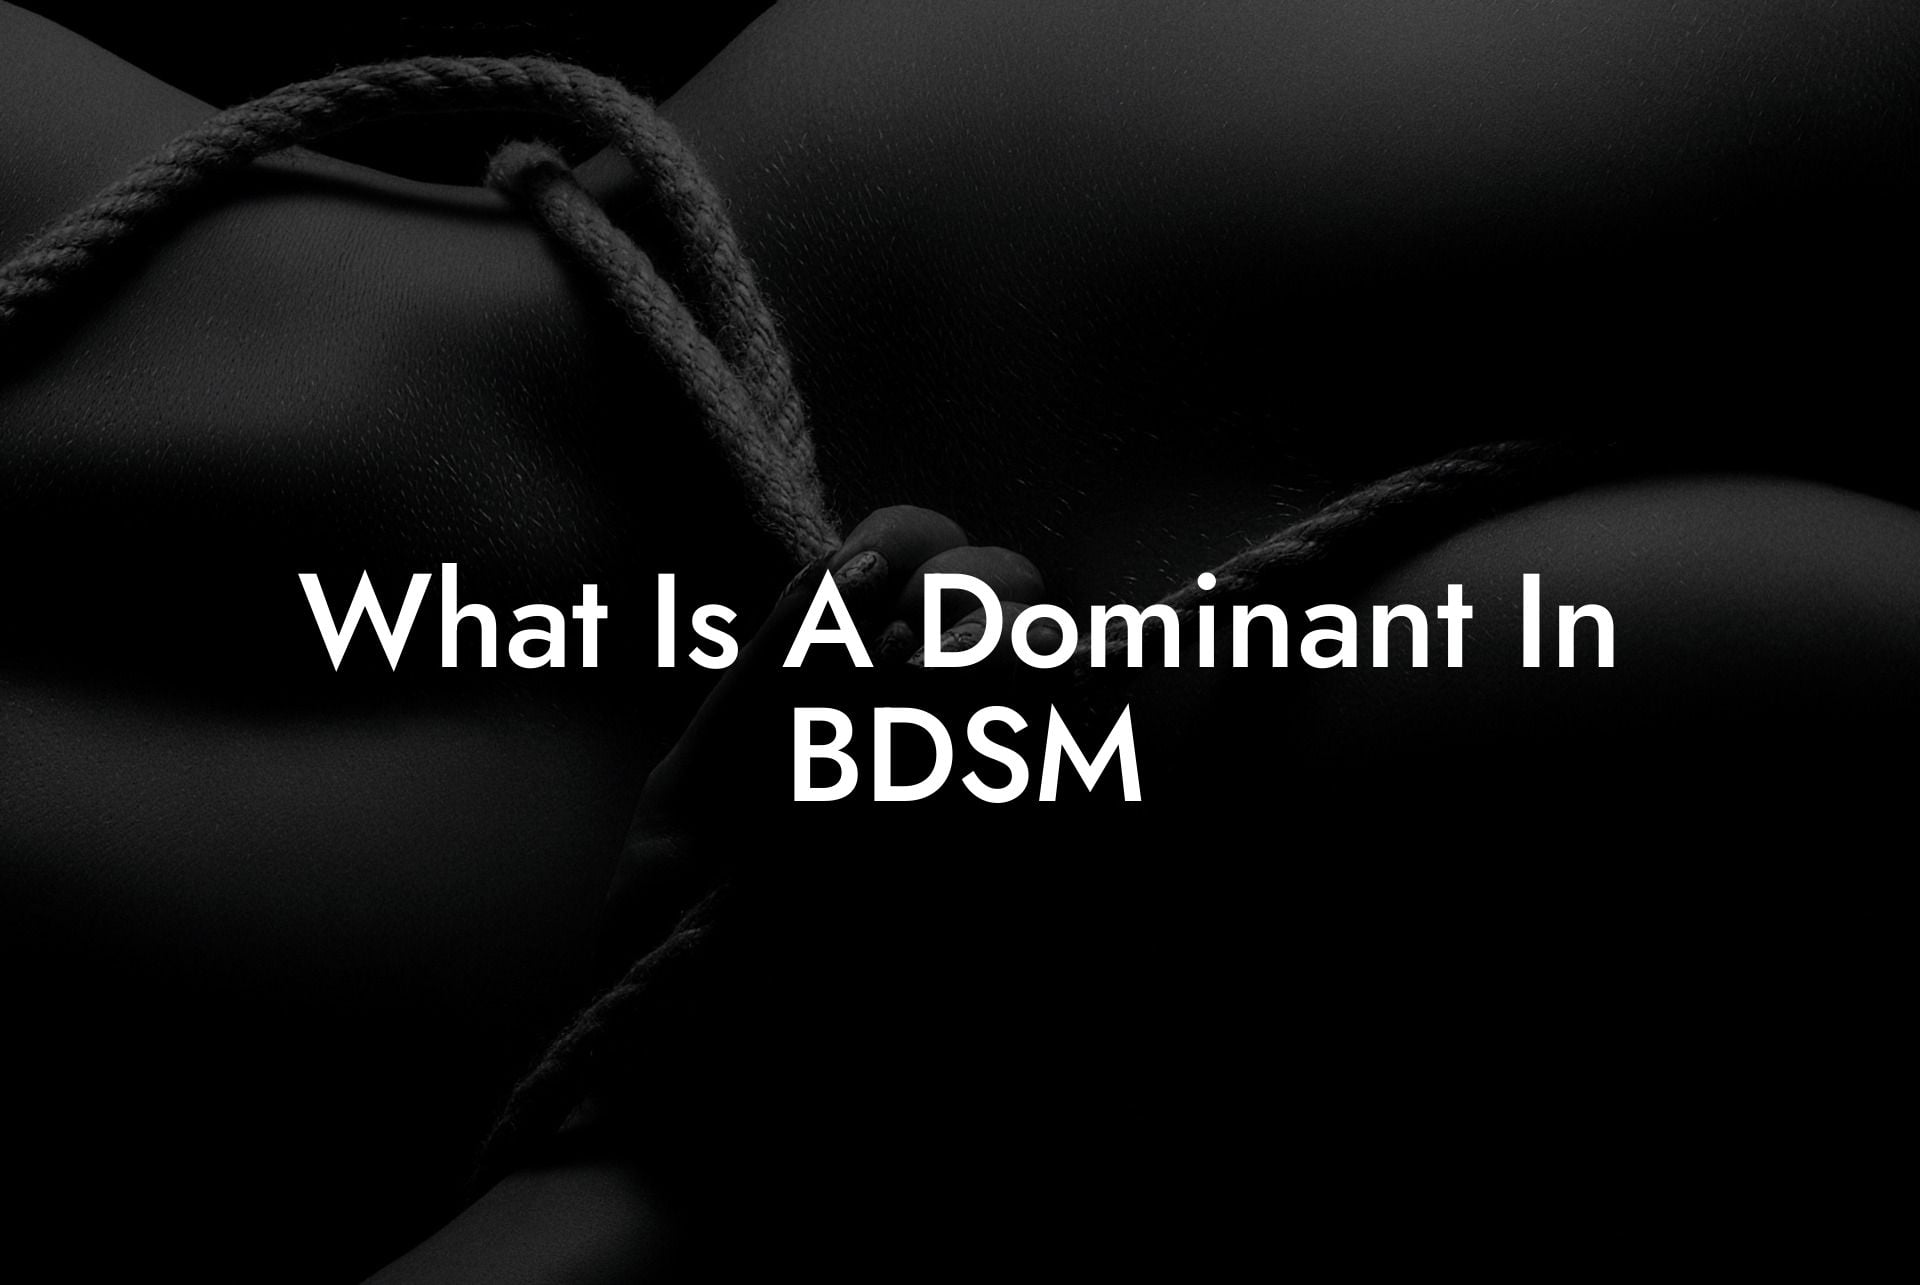 What Is A Dominant In BDSM